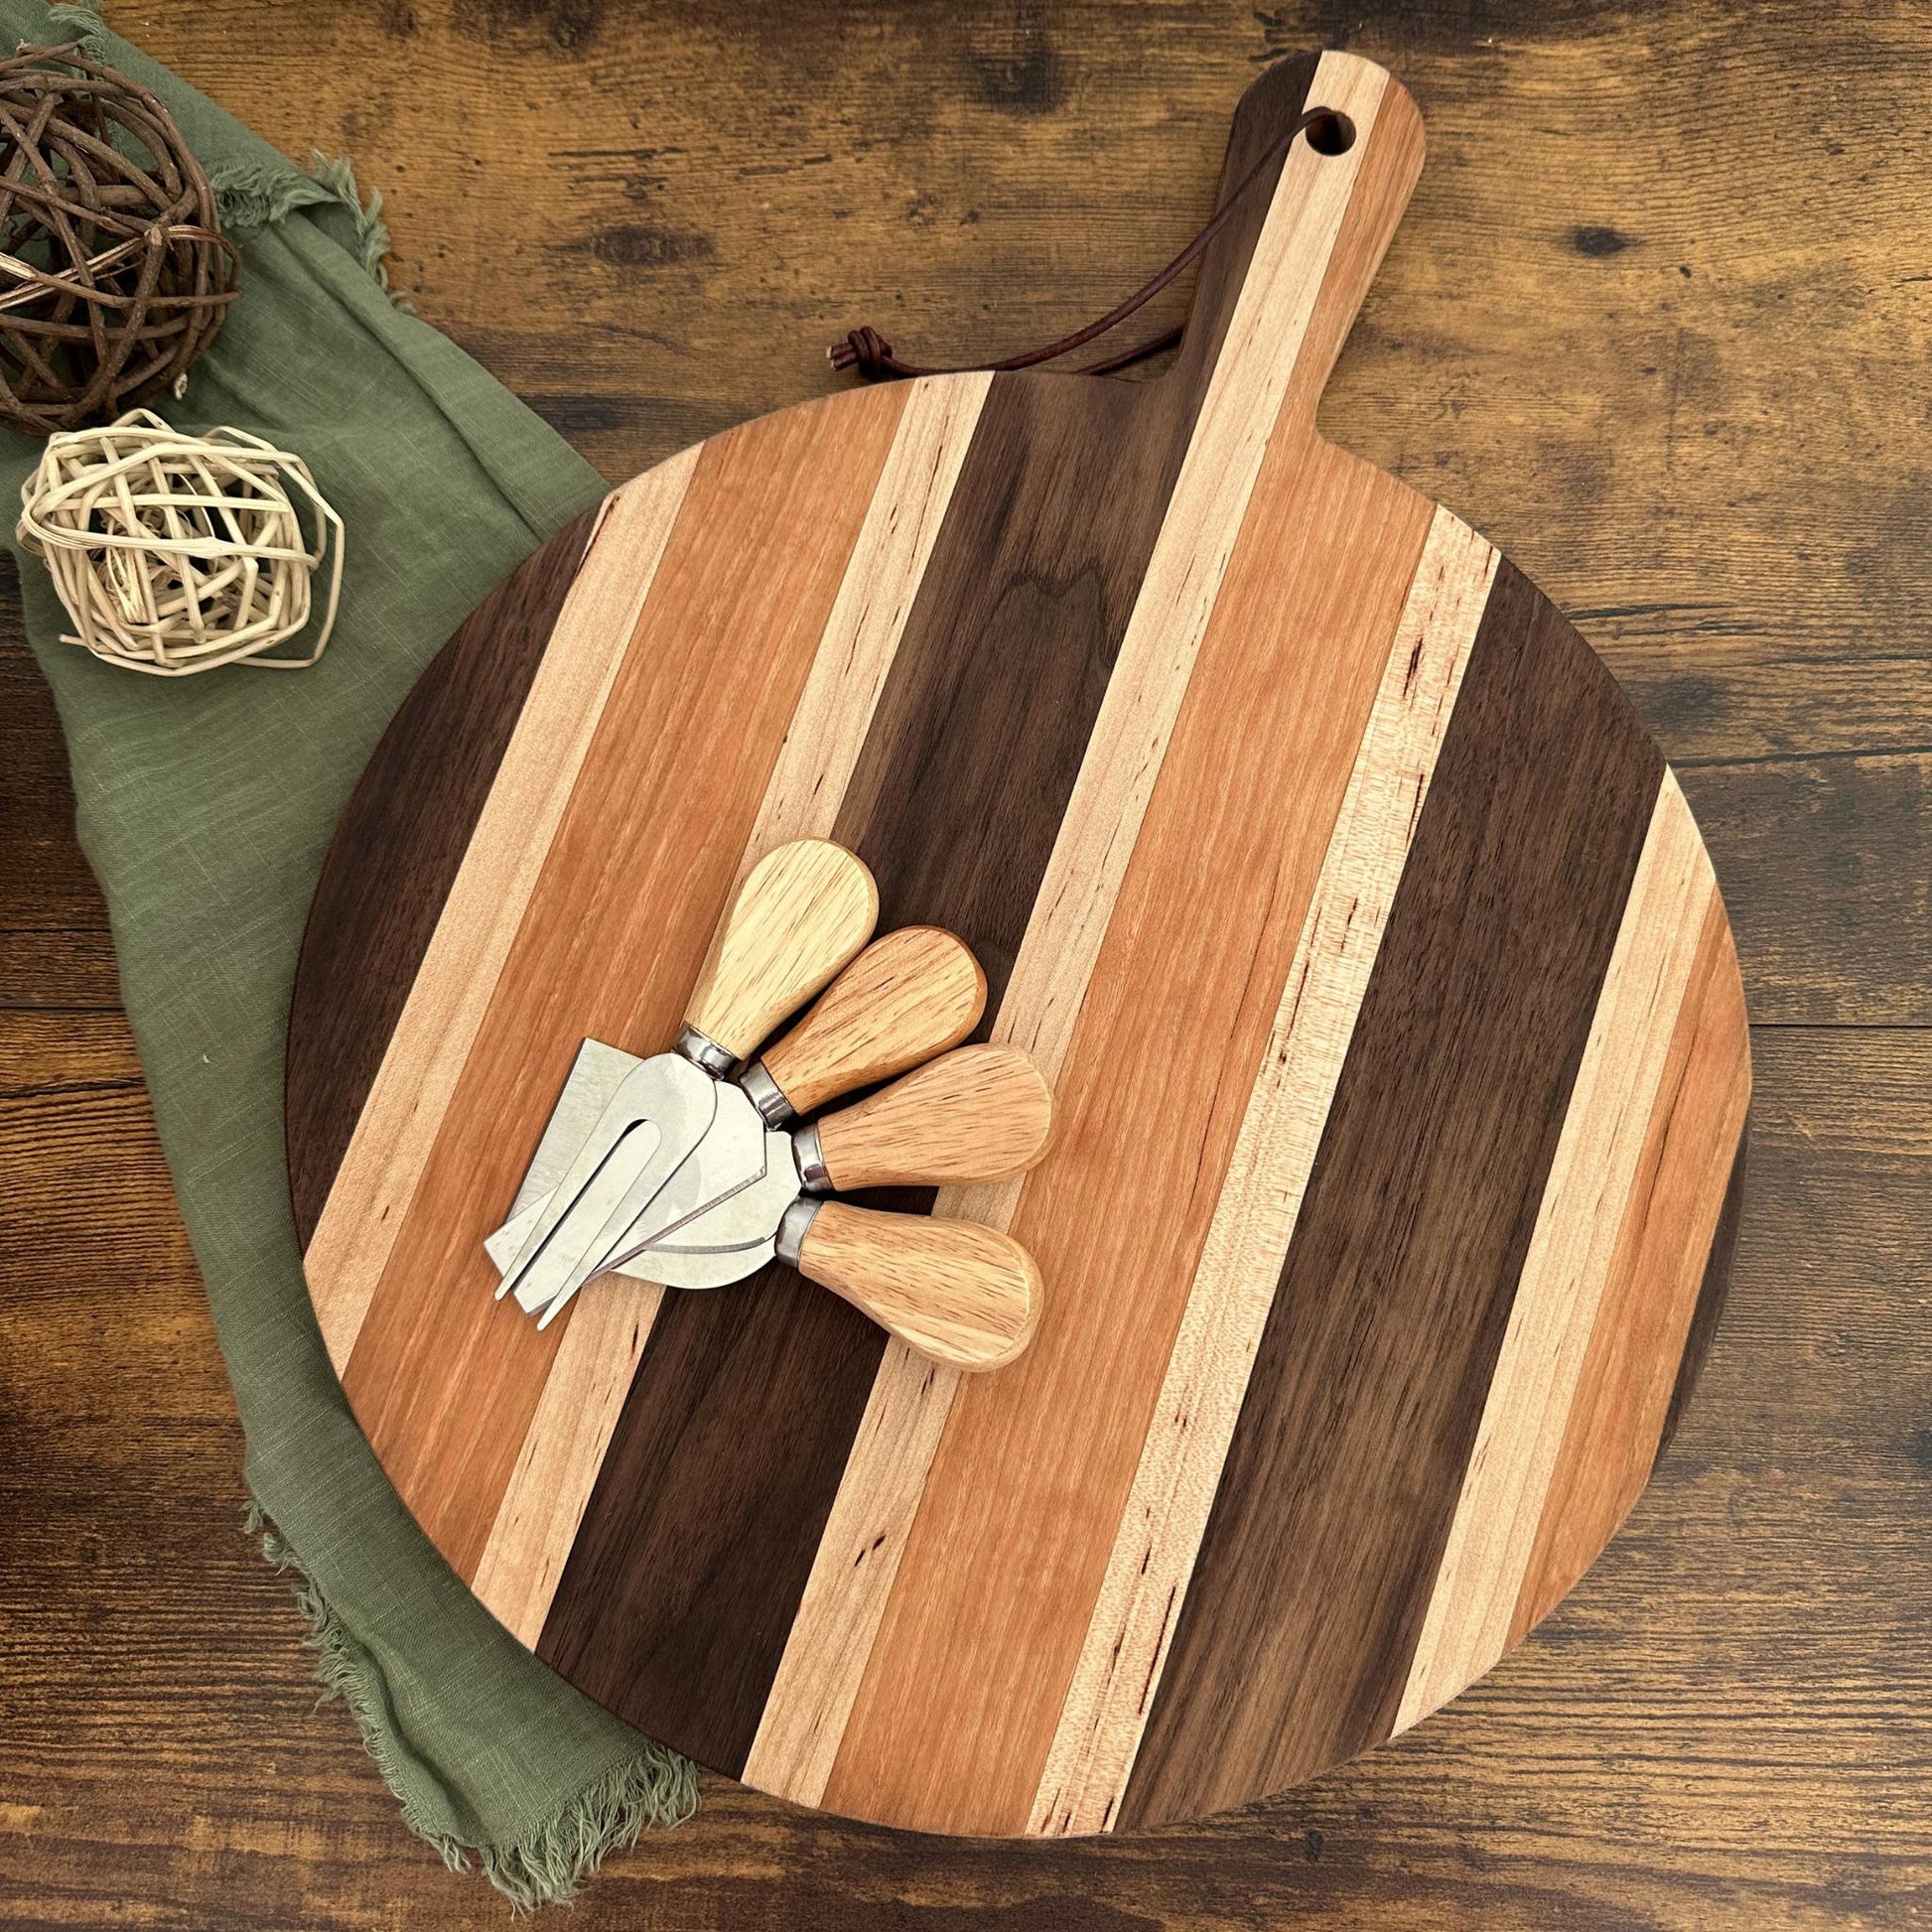 Wooden round cutting board for pizza 